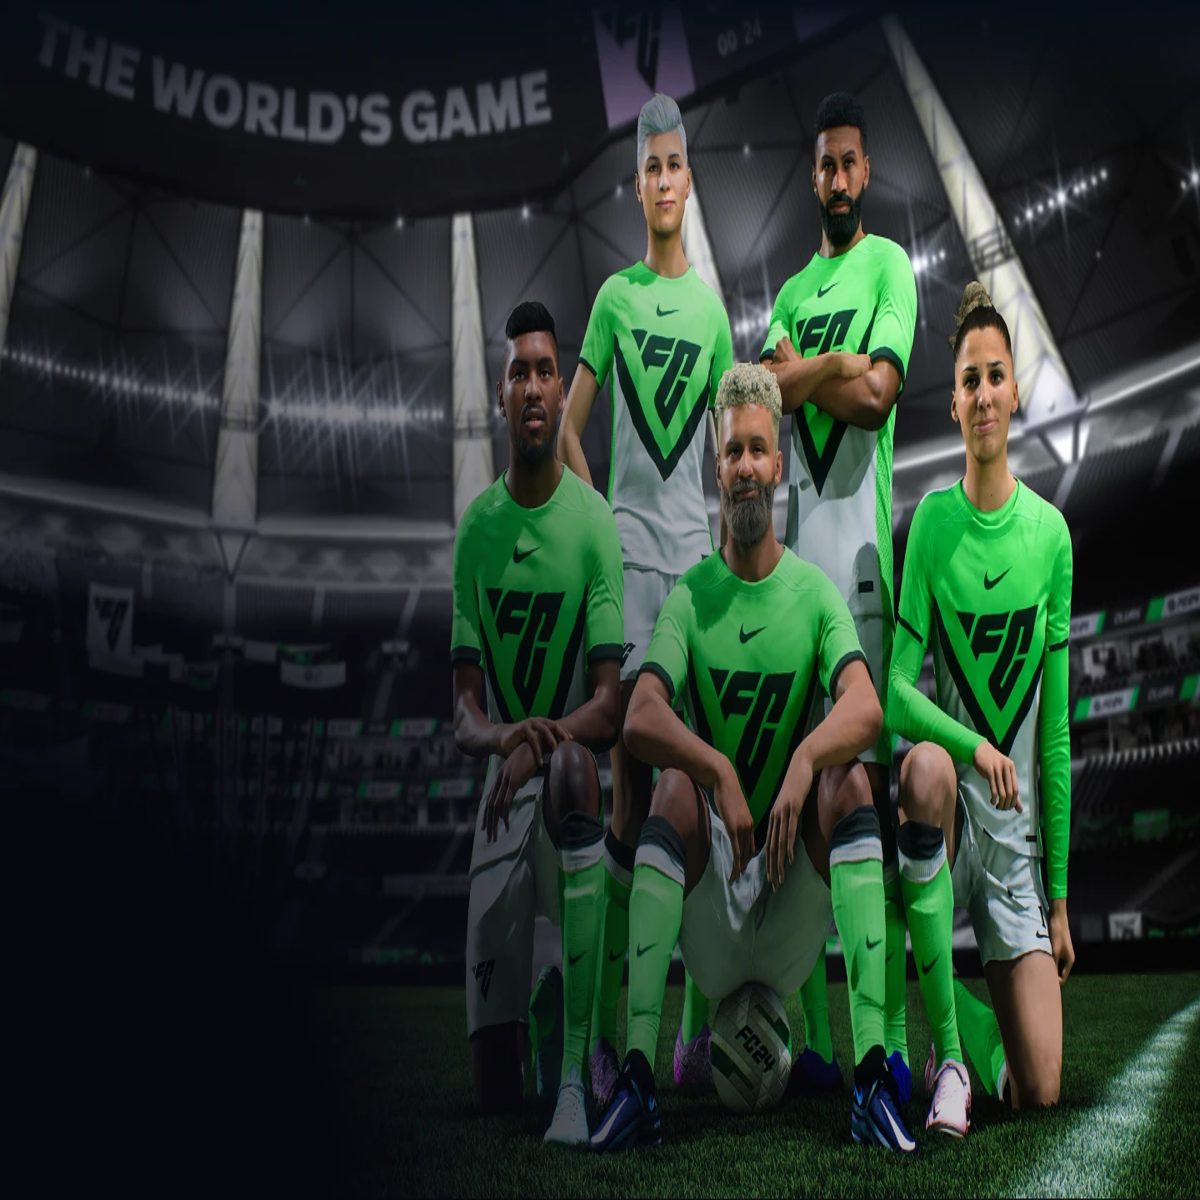 https://assetsio.gnwcdn.com/ea-sports-fc-24-women-ultimate-team.jpg?width=1200&height=1200&fit=crop&quality=100&format=png&enable=upscale&auto=webp